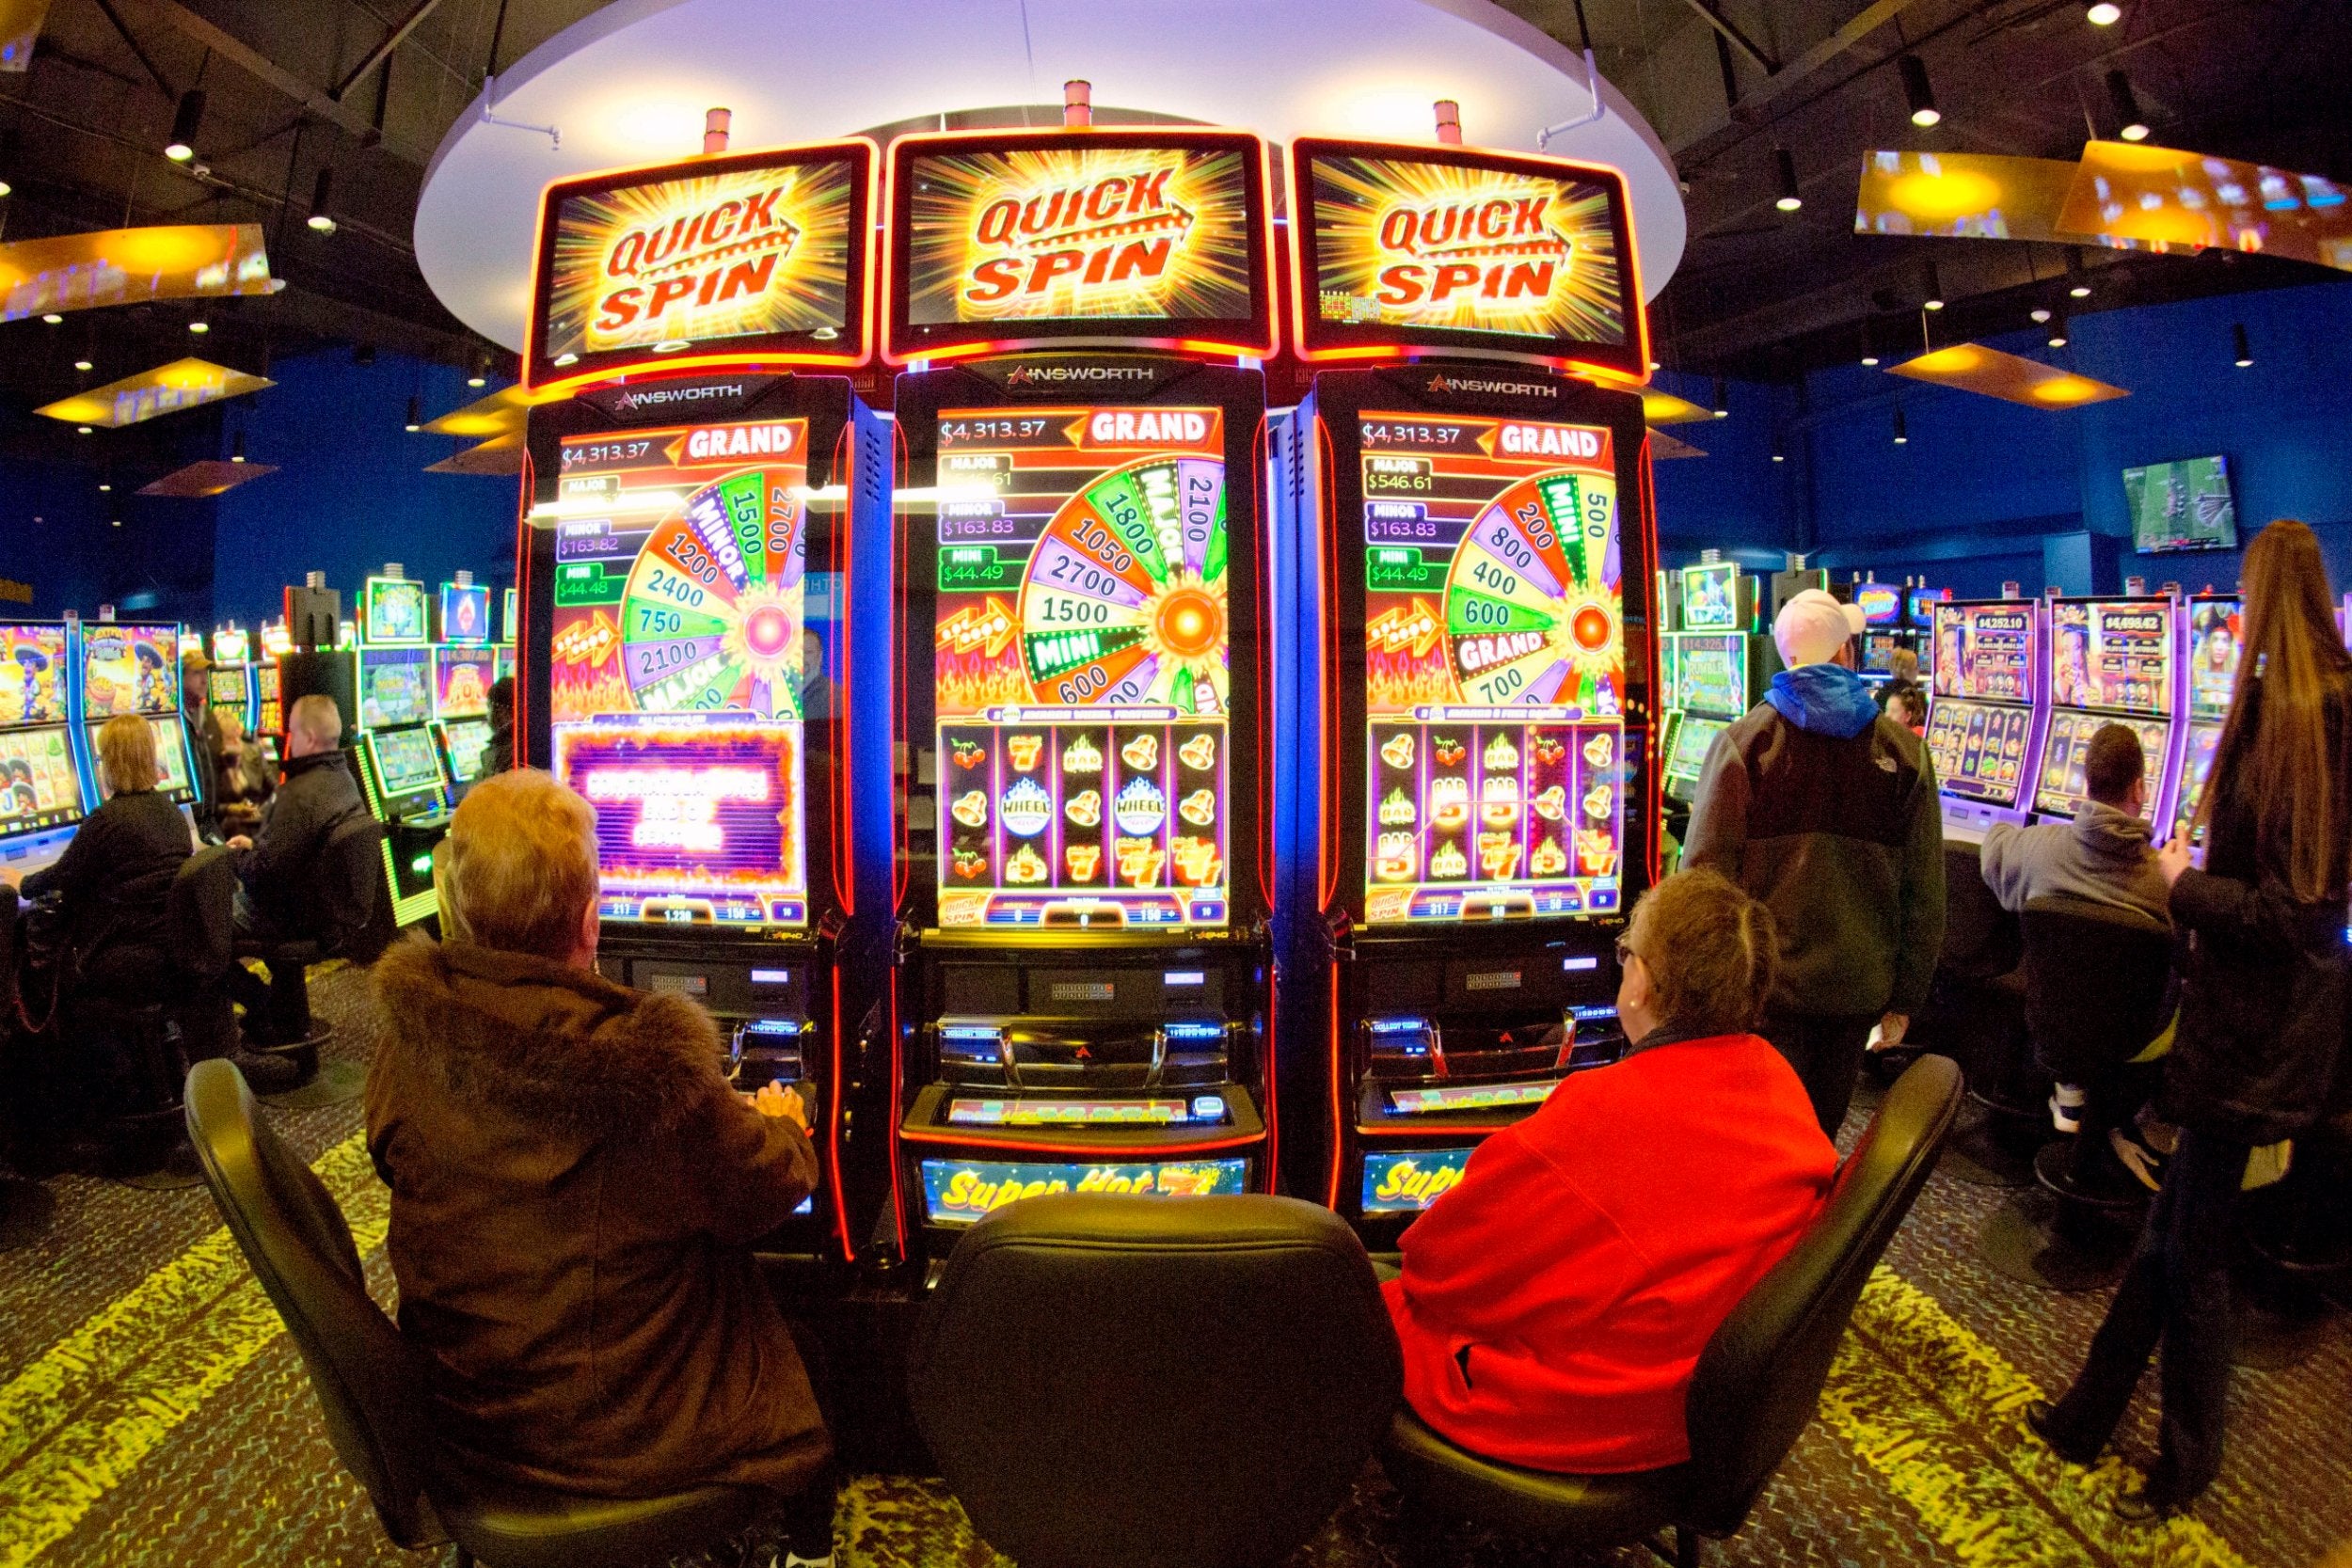 Slot machine games will still be available in bookmakers and casinos